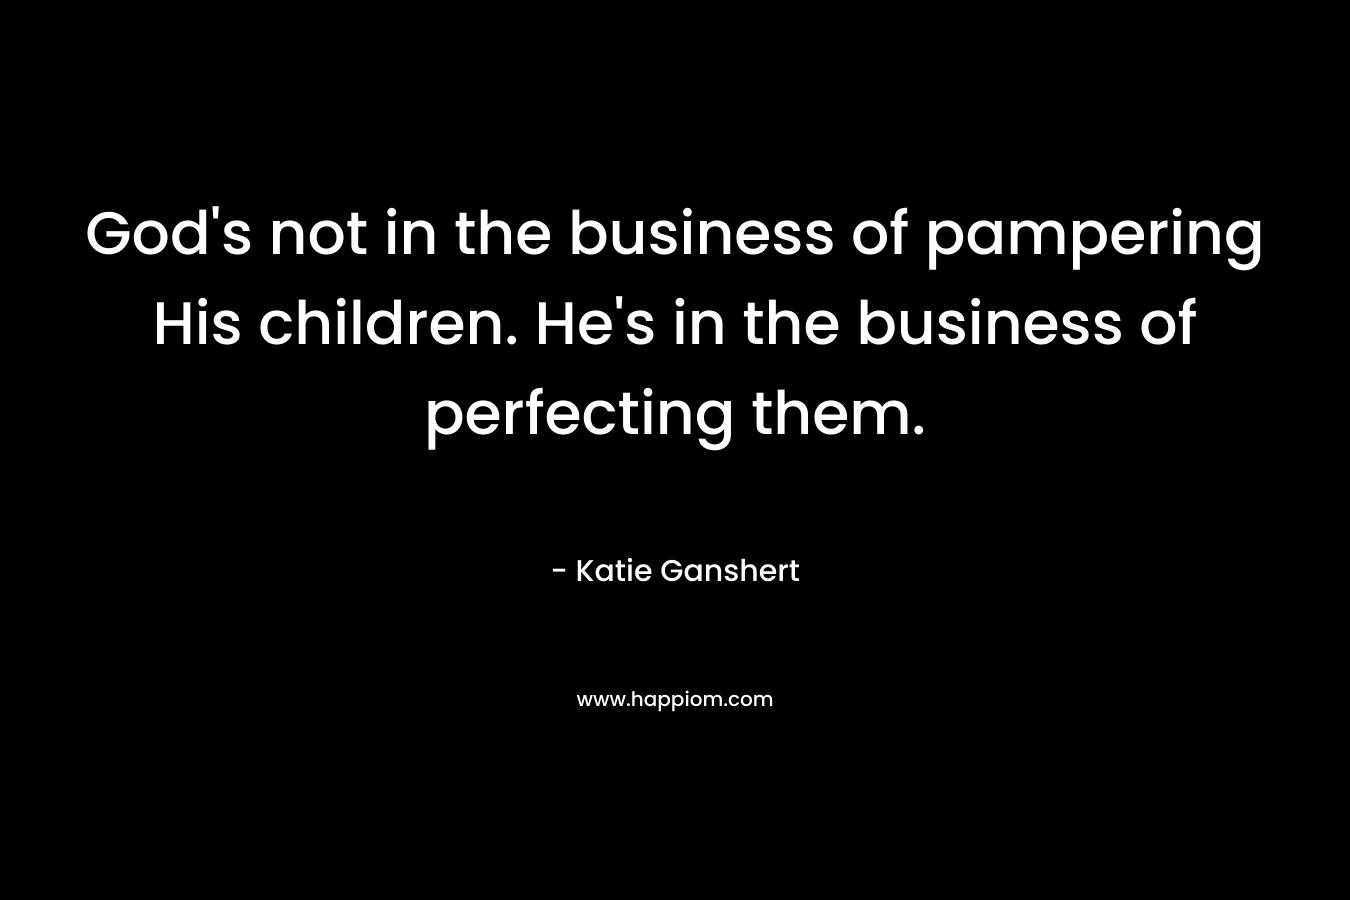 God's not in the business of pampering His children. He's in the business of perfecting them.